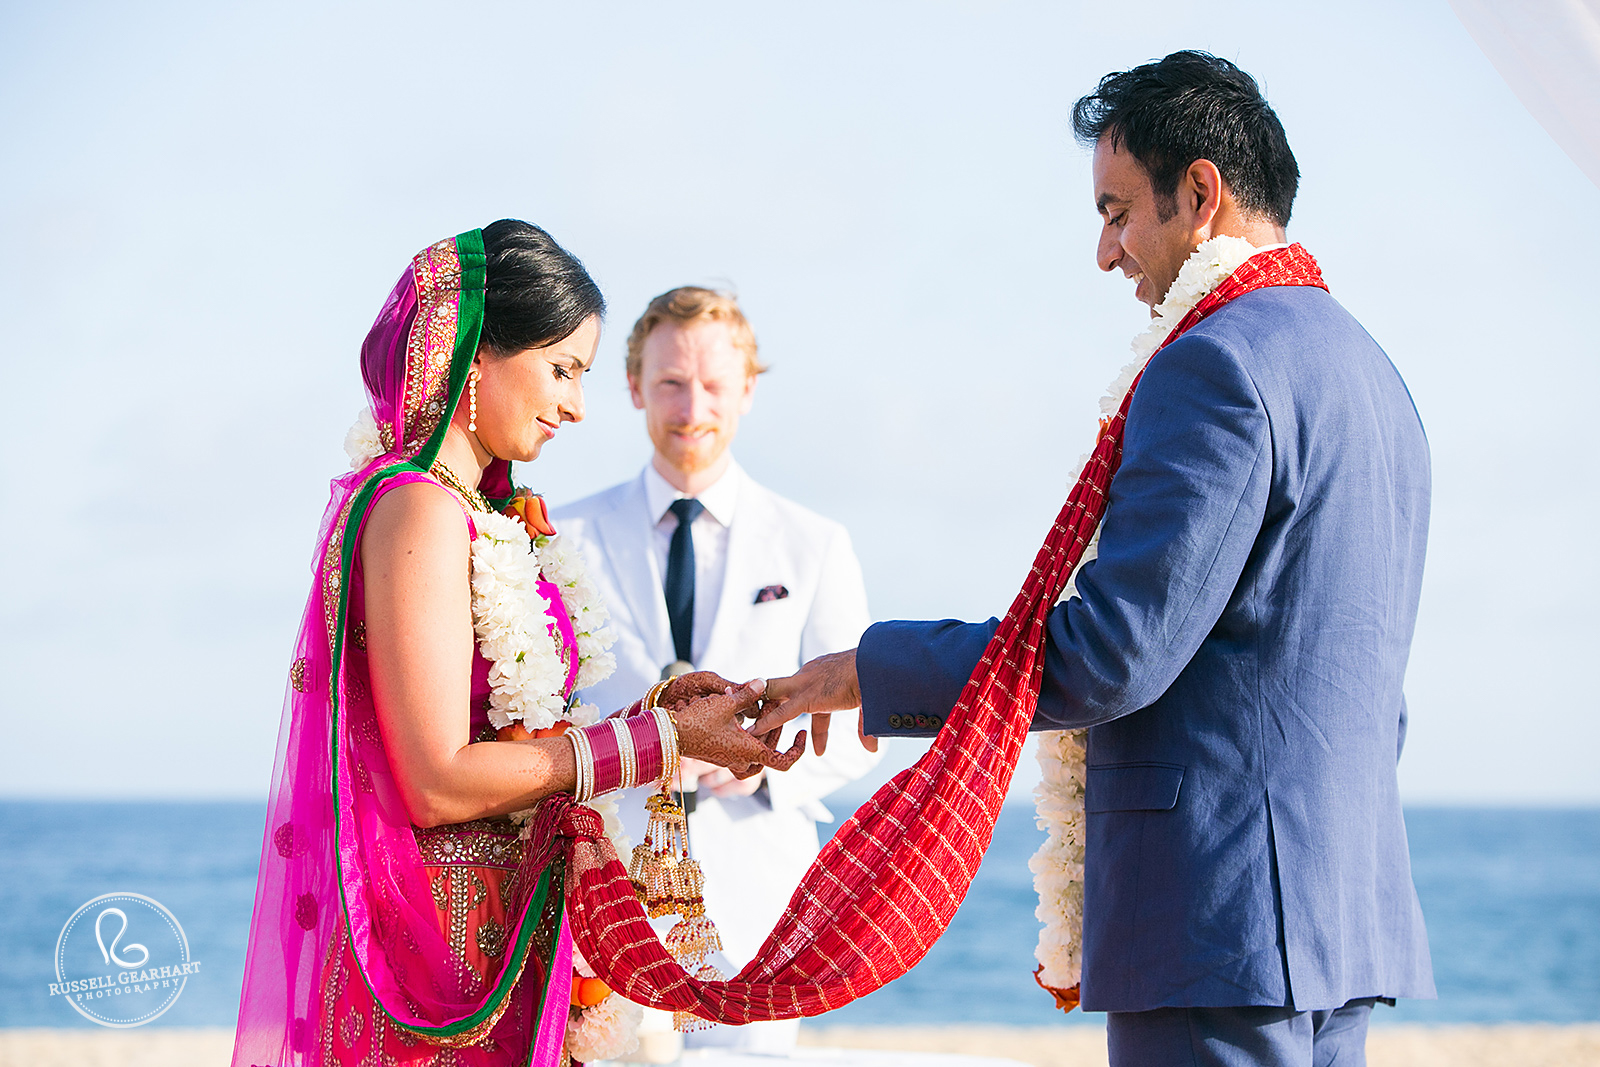 Exchanging Rings – Pueblo Bonito Sunset Beach Wedding – Russell Gearhart Photography – www.gearhartphoto.com